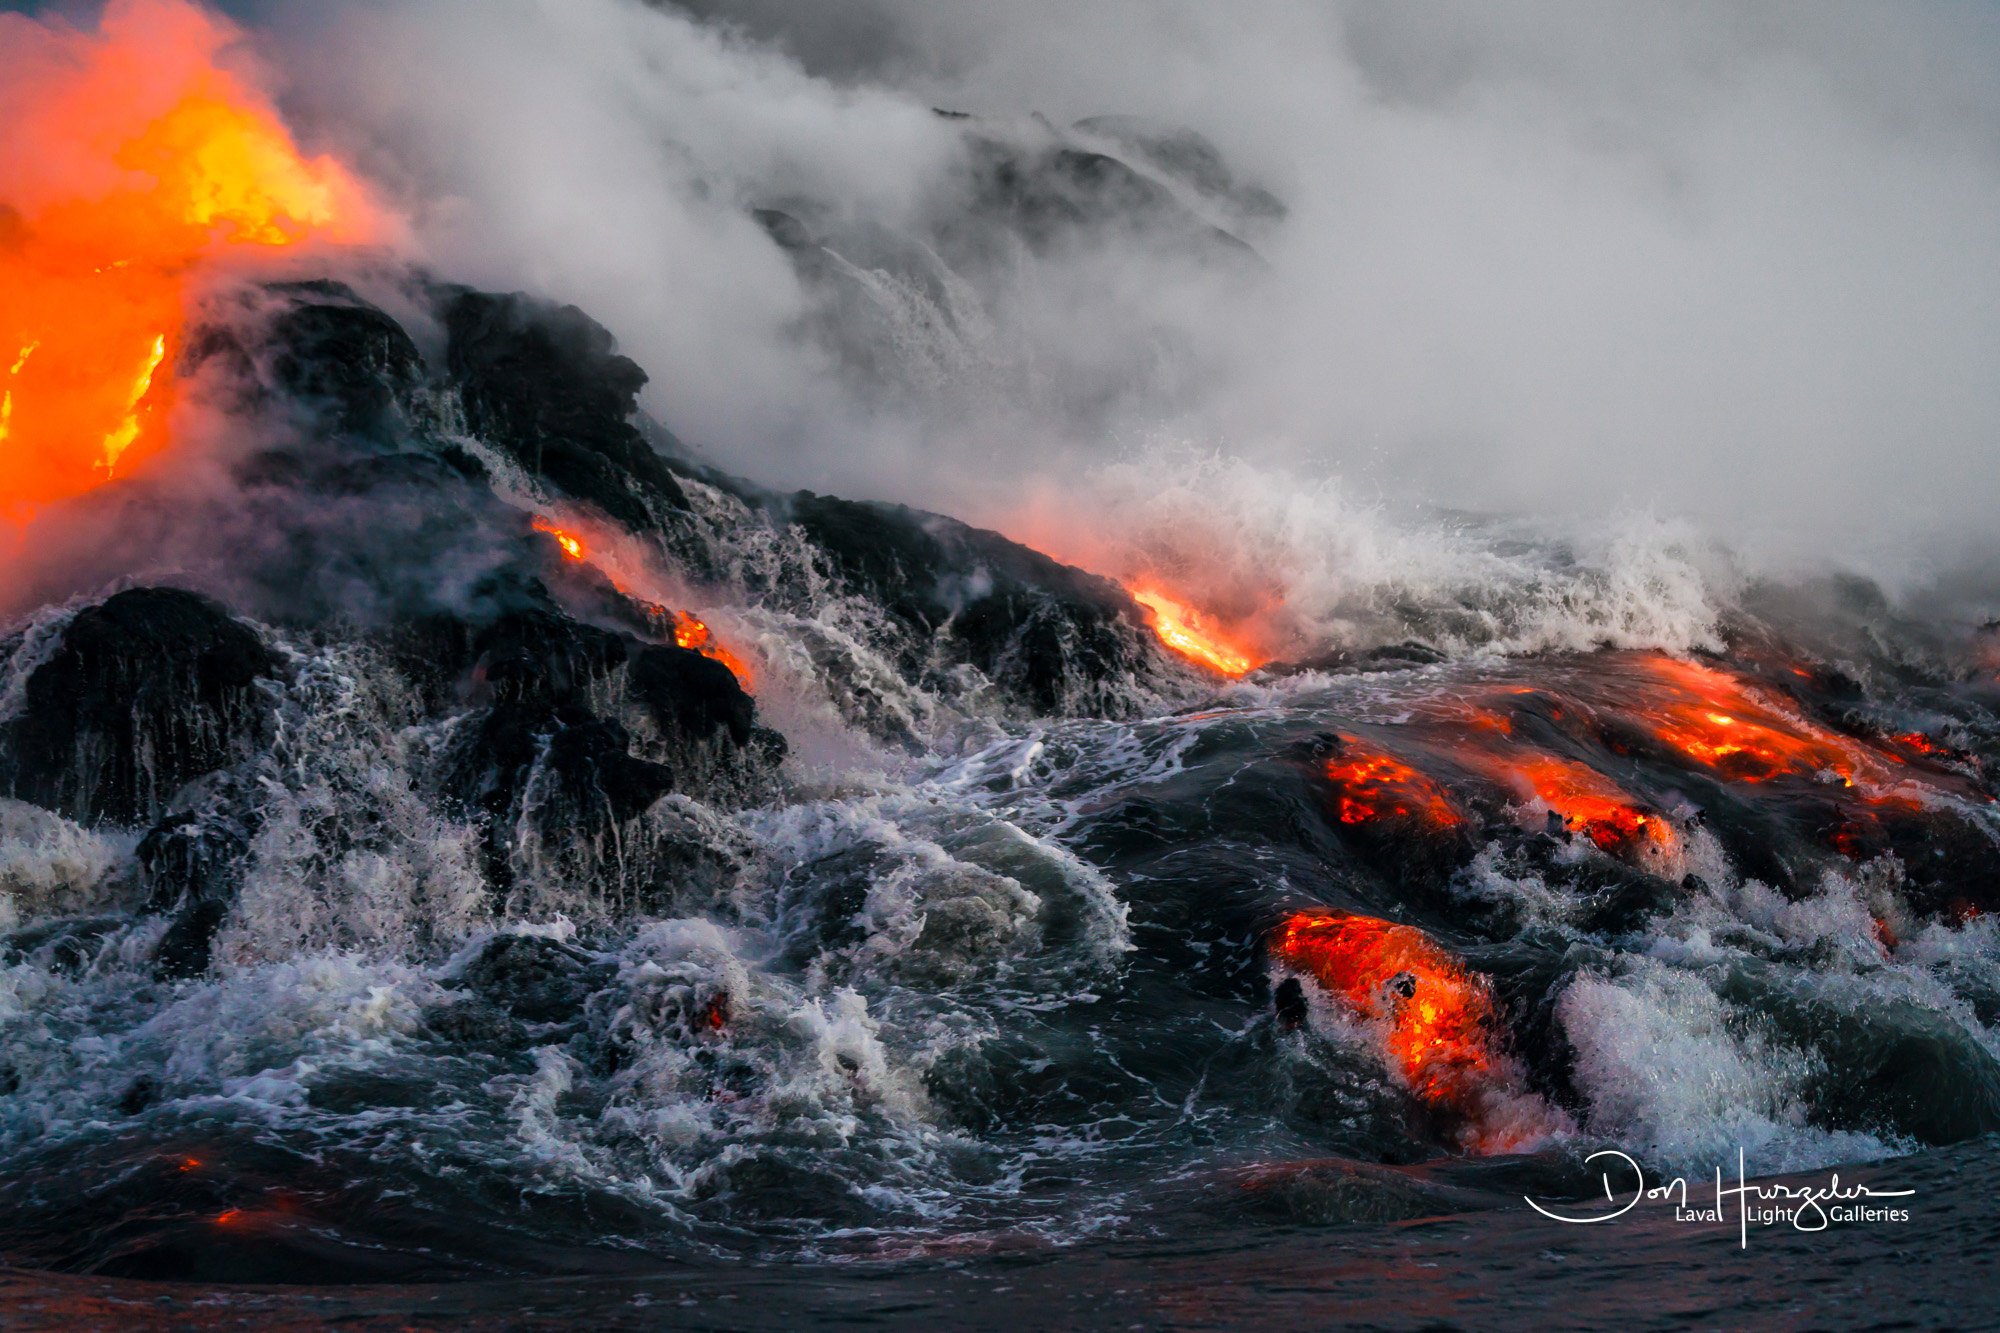 Love the way the lava is under the incoming ocean water on the right.